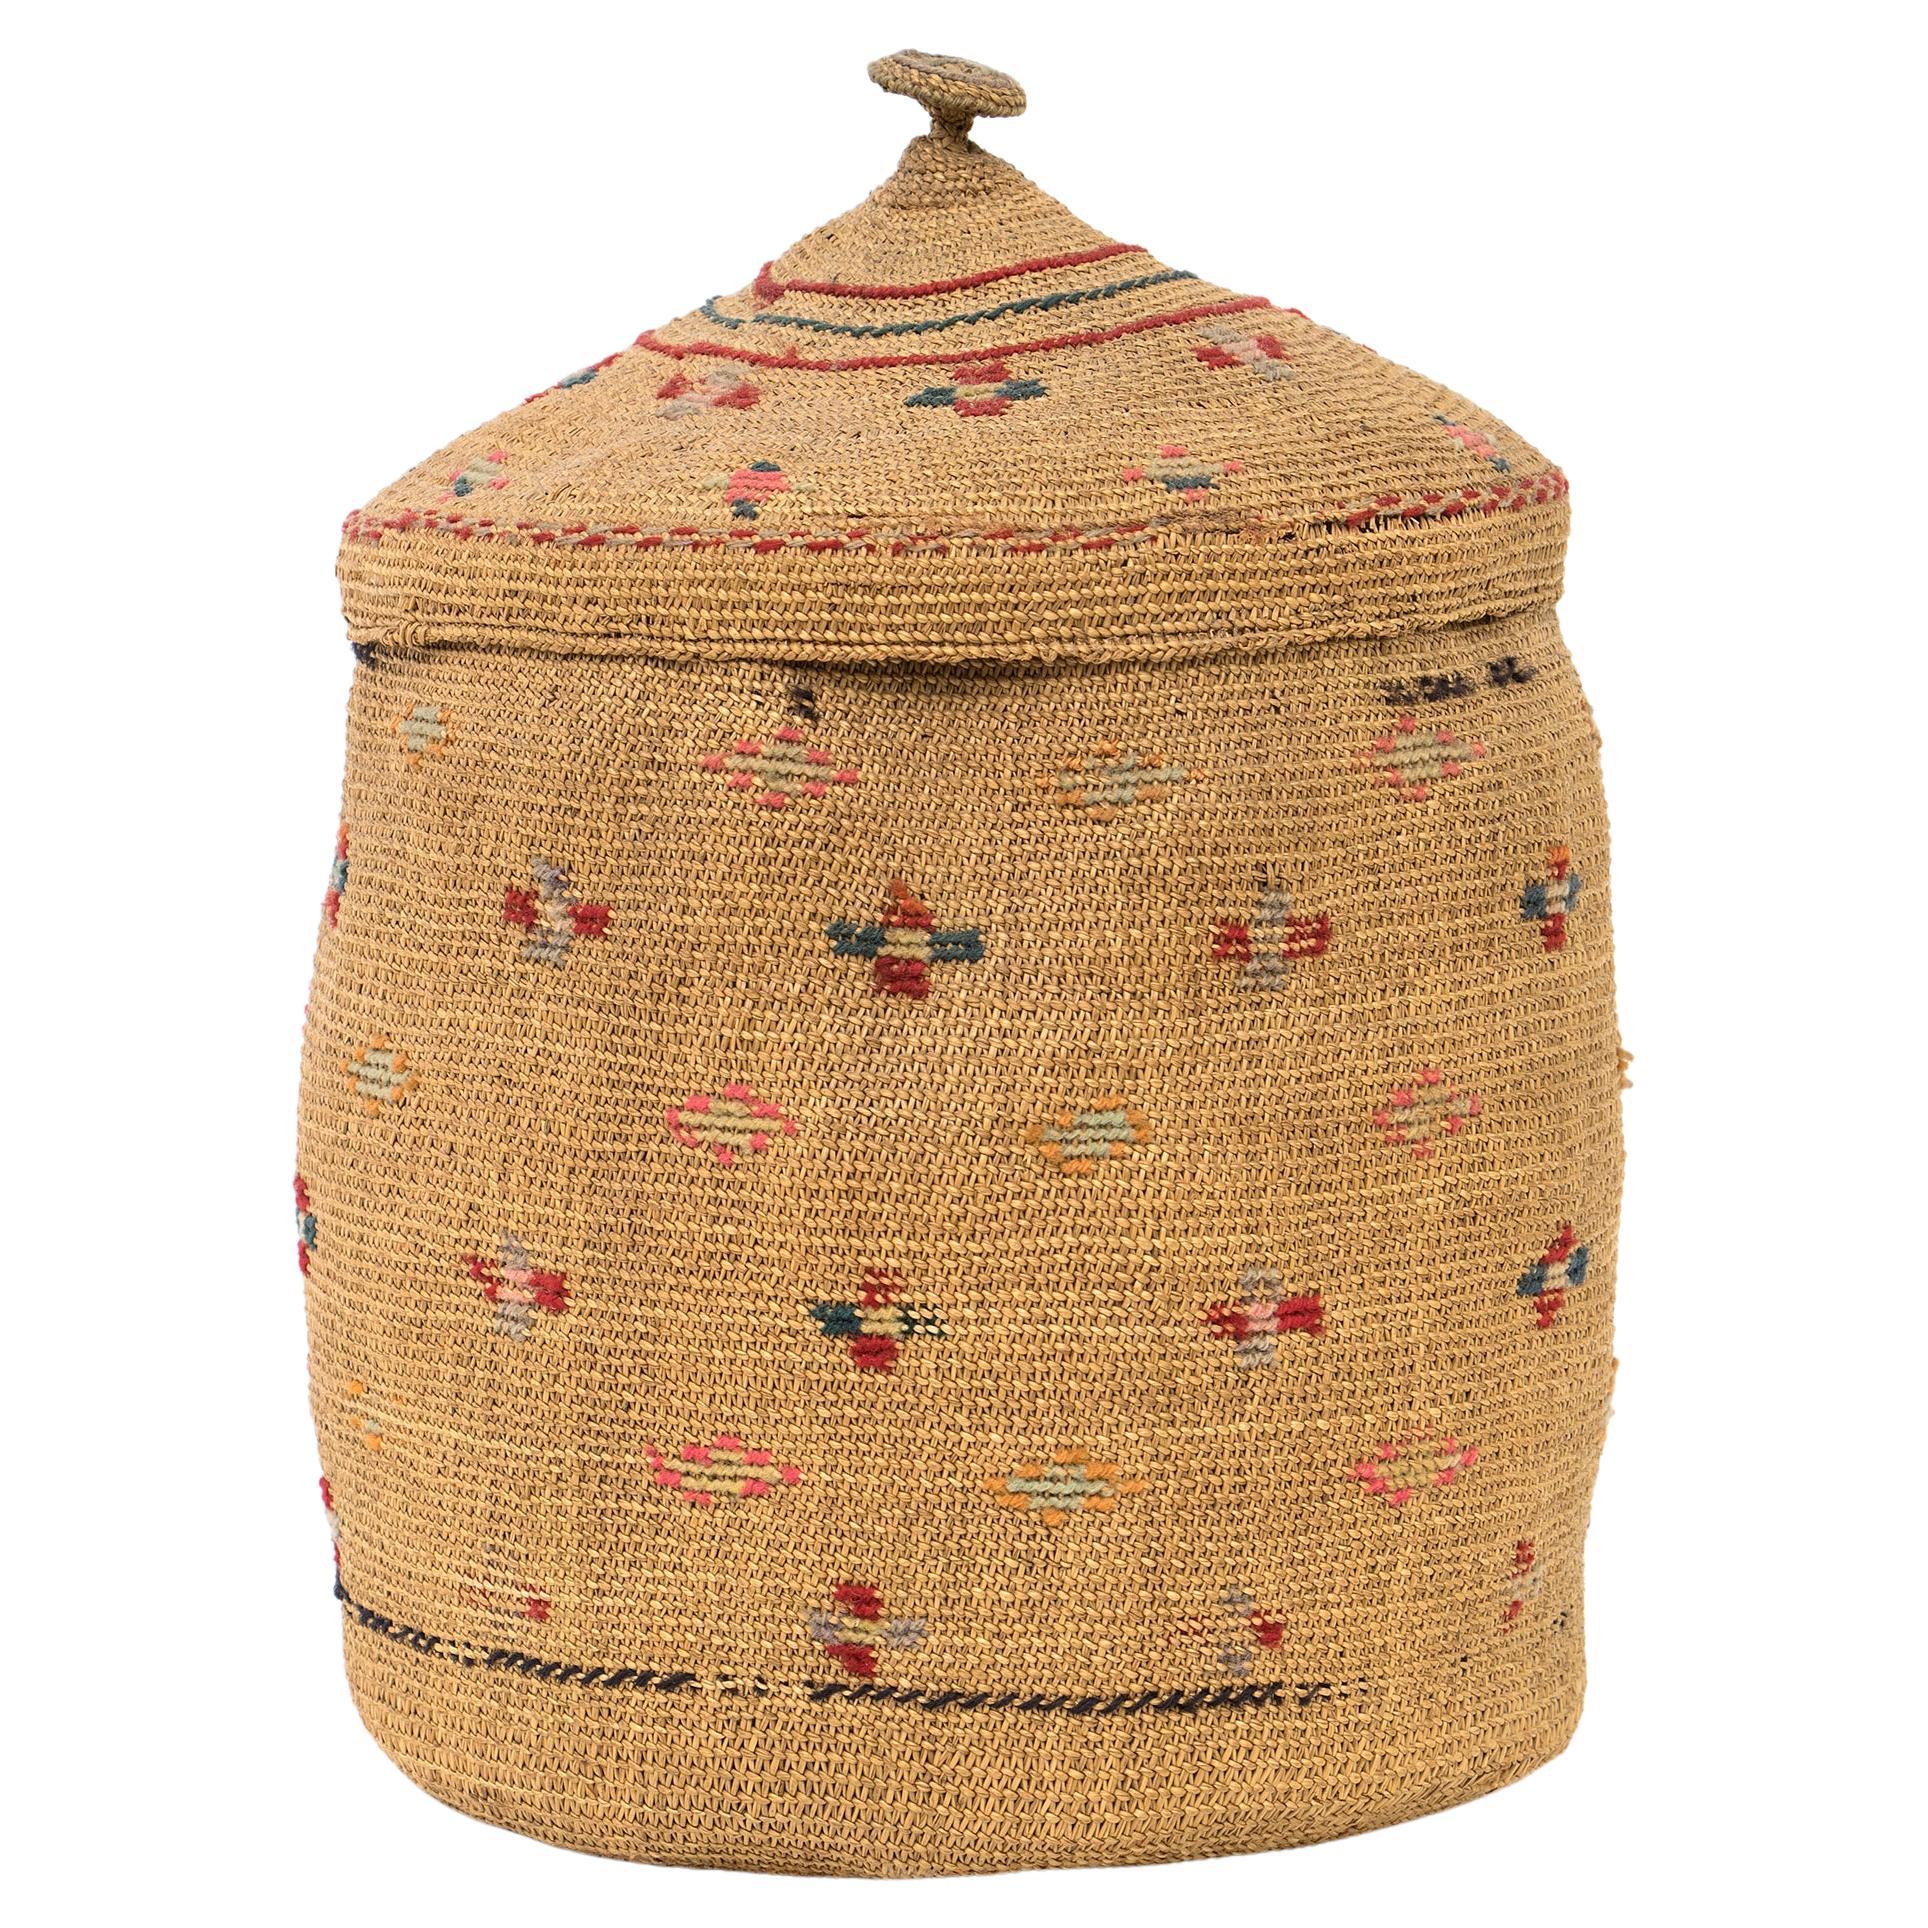 Northwest Coast 1900 Woven Basket with Top, Multicolor Cross Patterns, Table Top For Sale